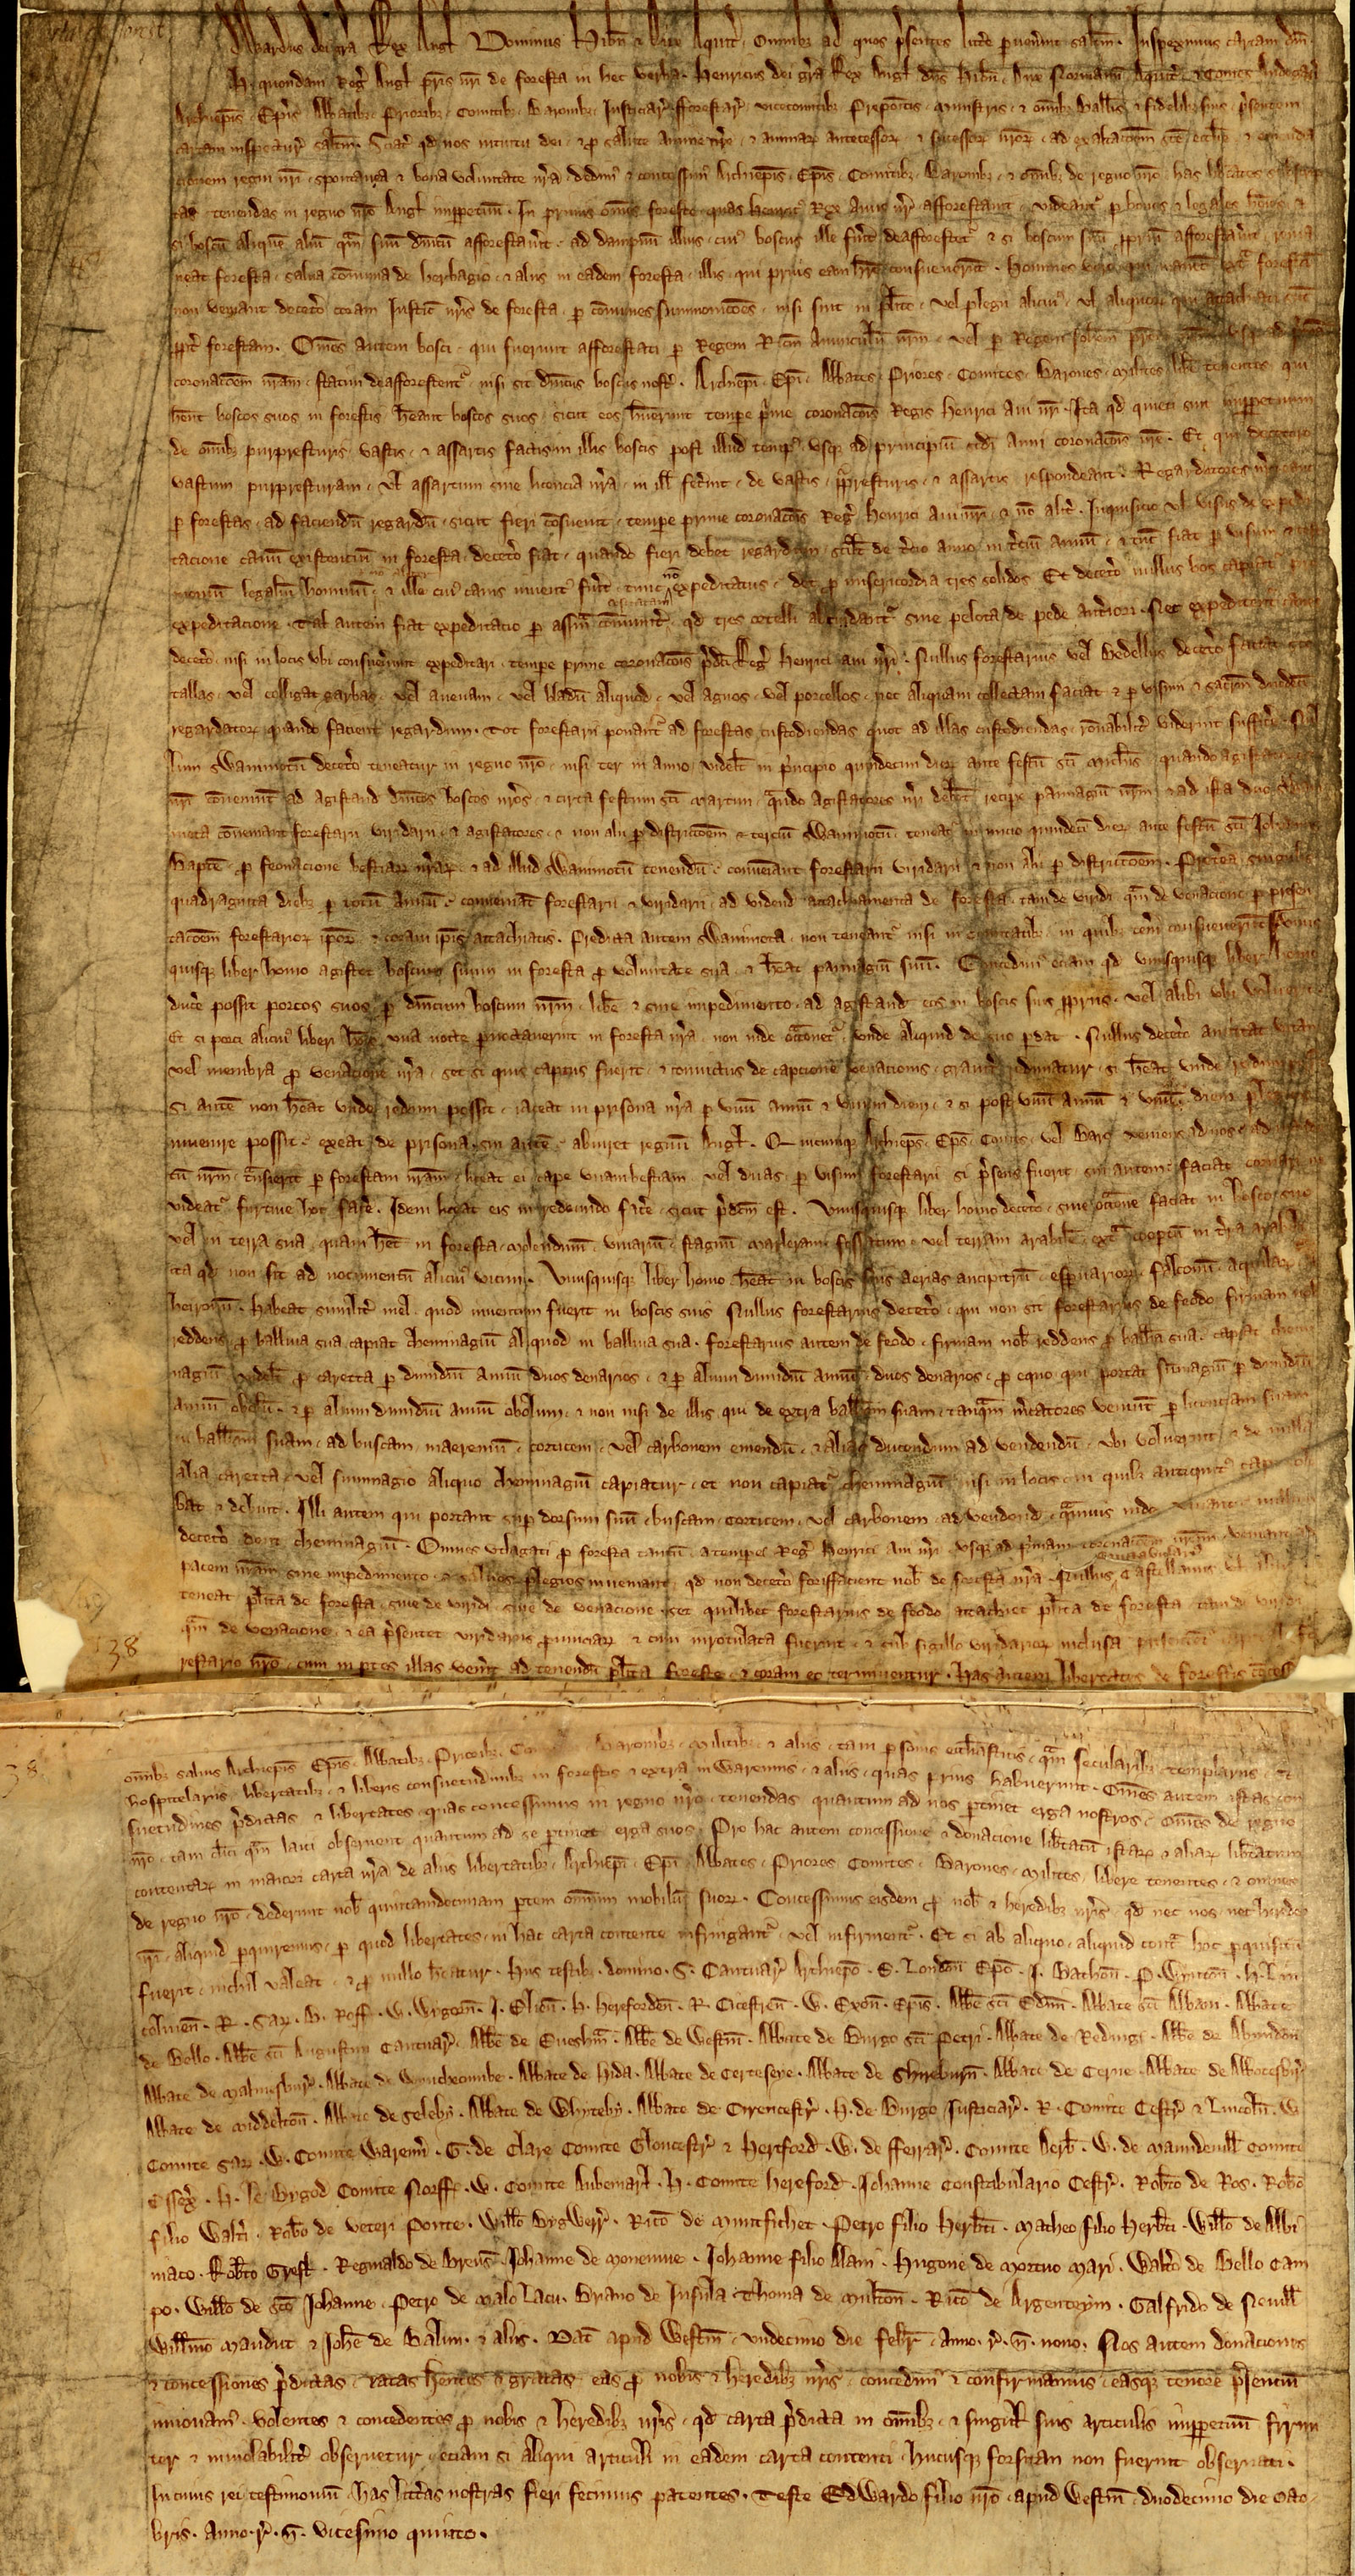 Charter of the Forest, Westminster, 1225 (C 74/1)